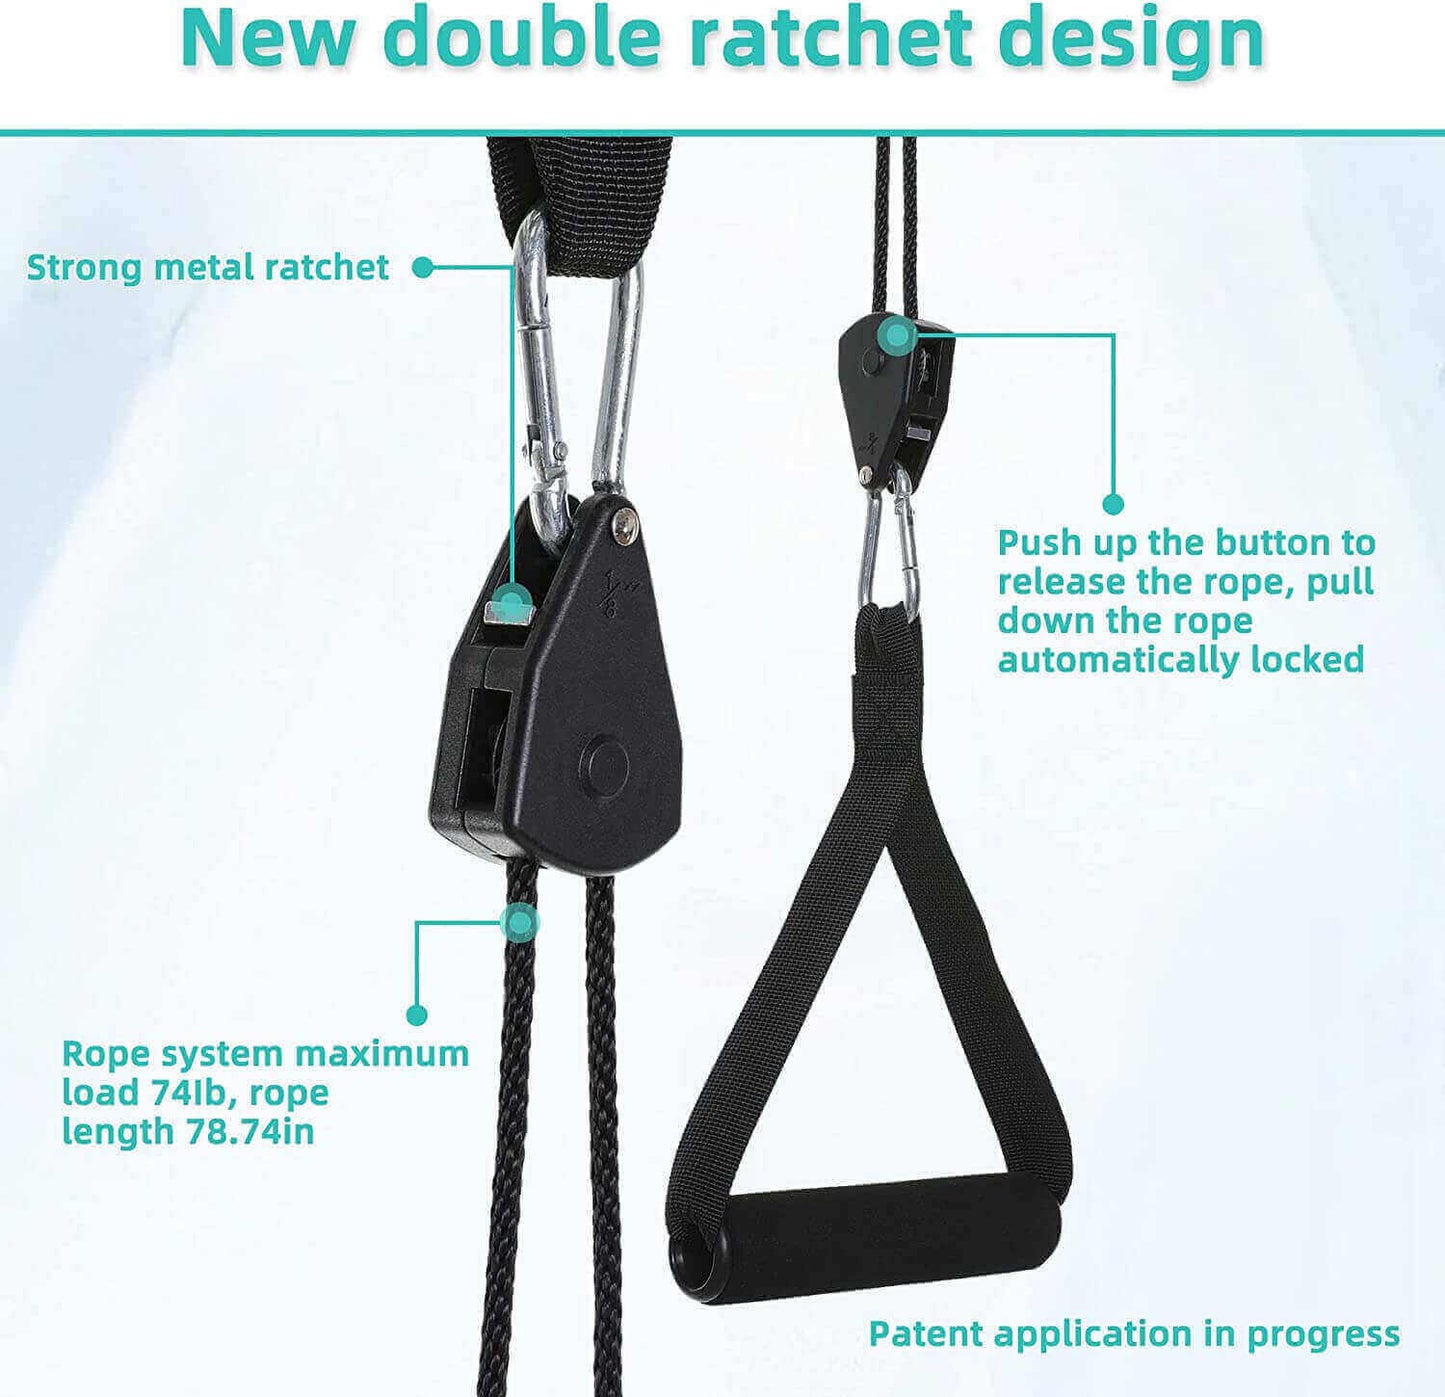 overdoor cervical traction device, neck traction device, double ratchet design